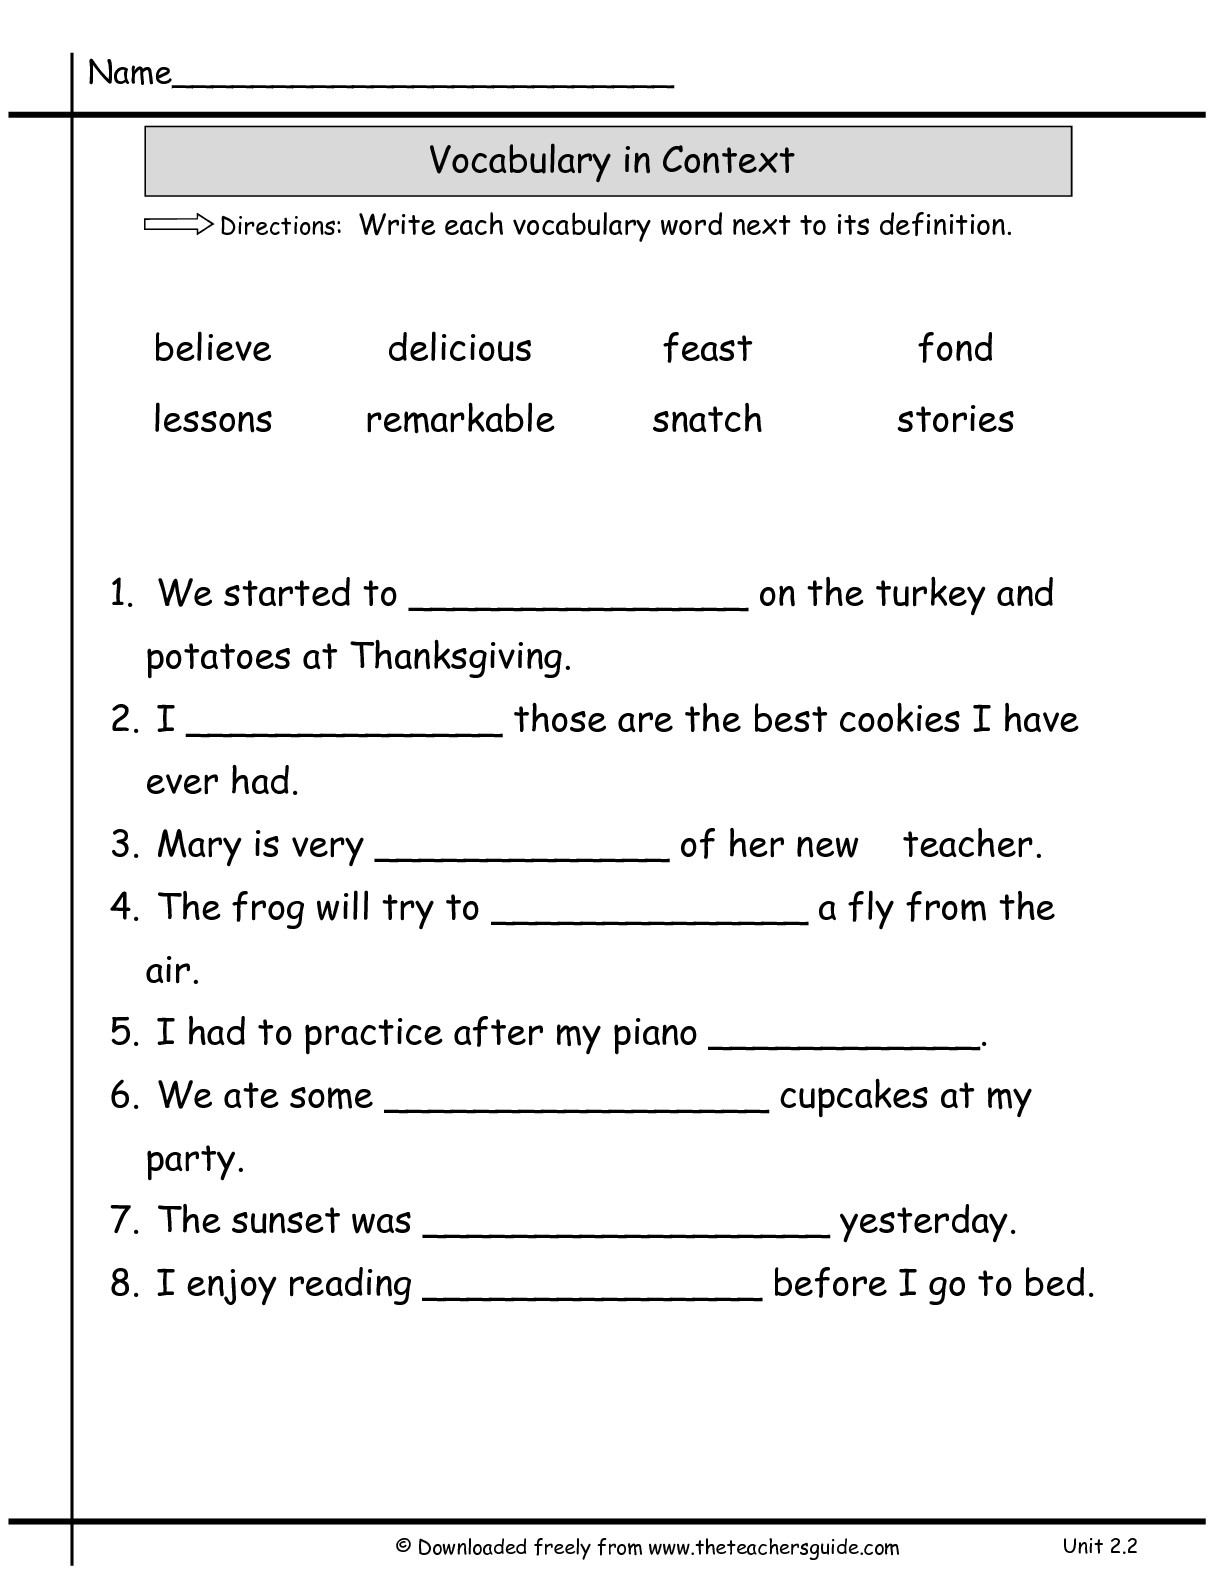 12-best-images-of-guessing-vocabulary-in-context-worksheets-guessing-meaning-from-context